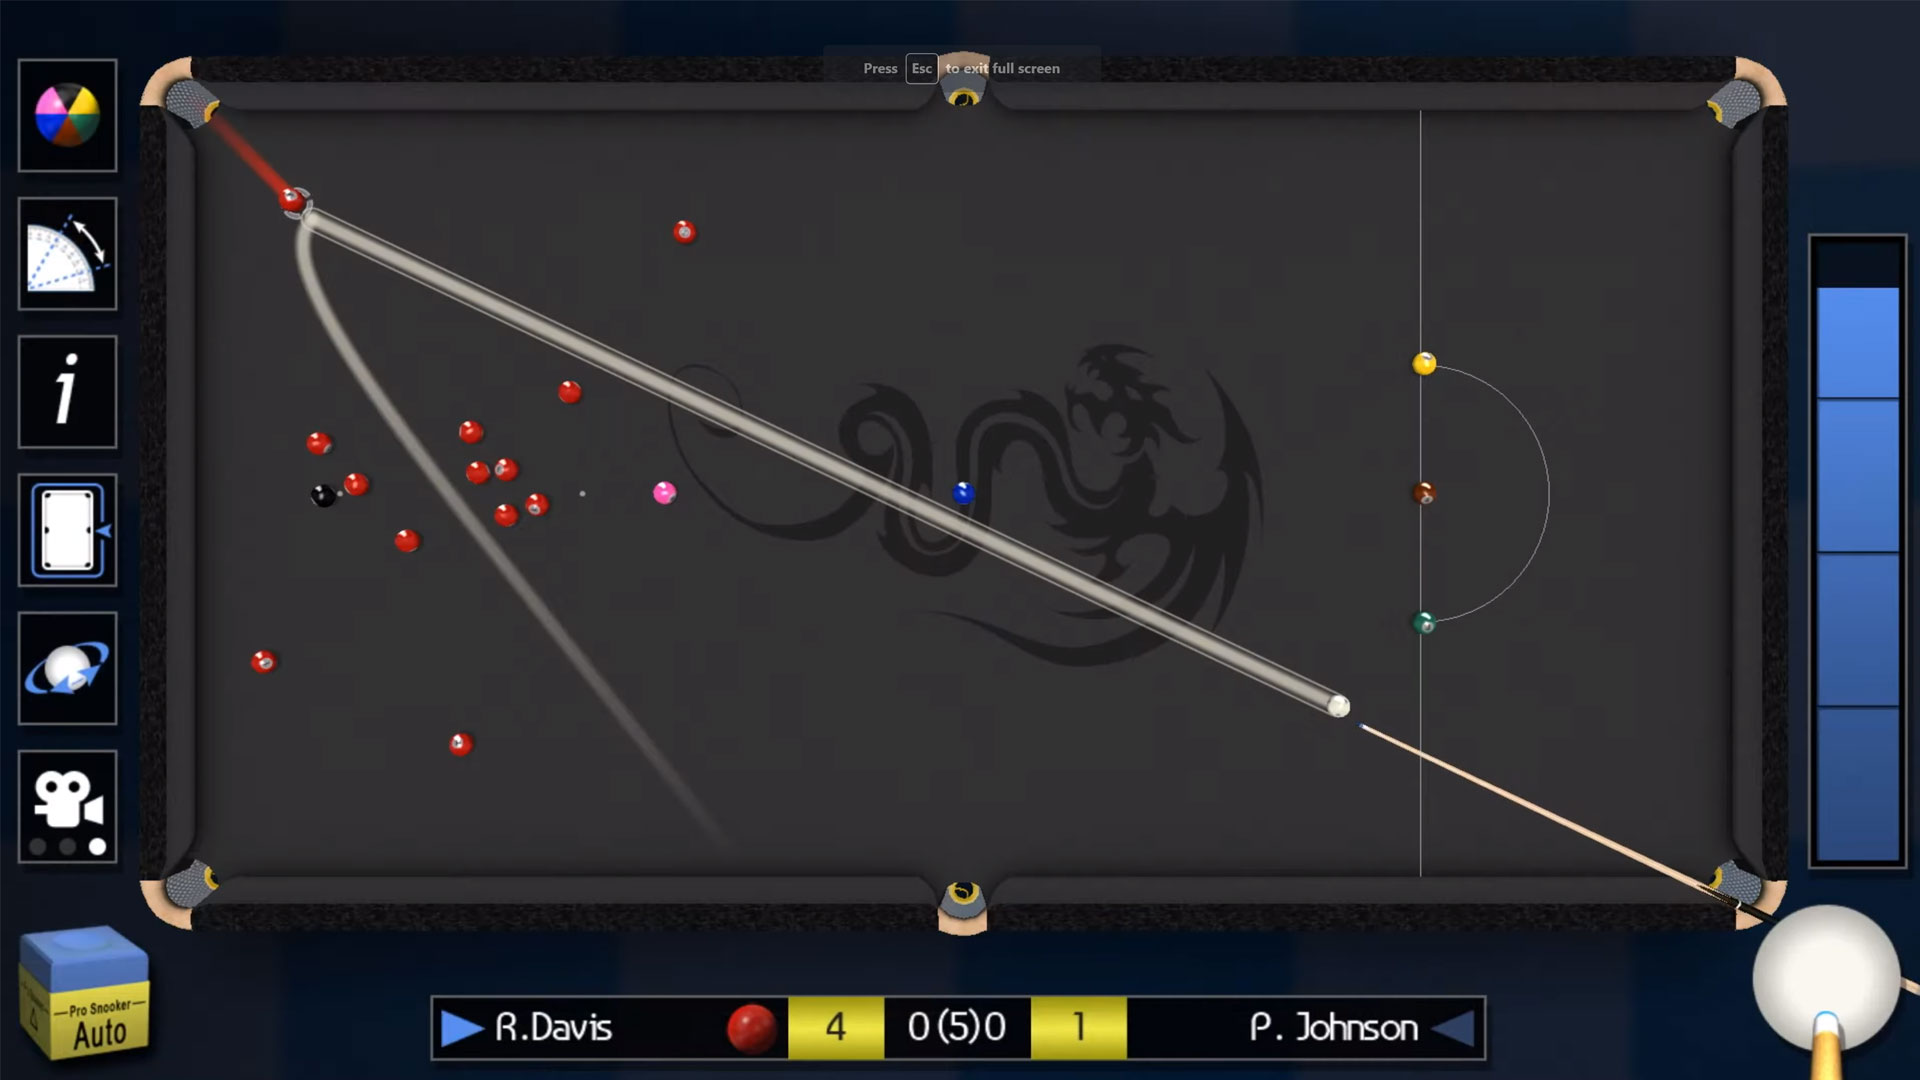 How to aim the red ball in Pro Snooker 2021